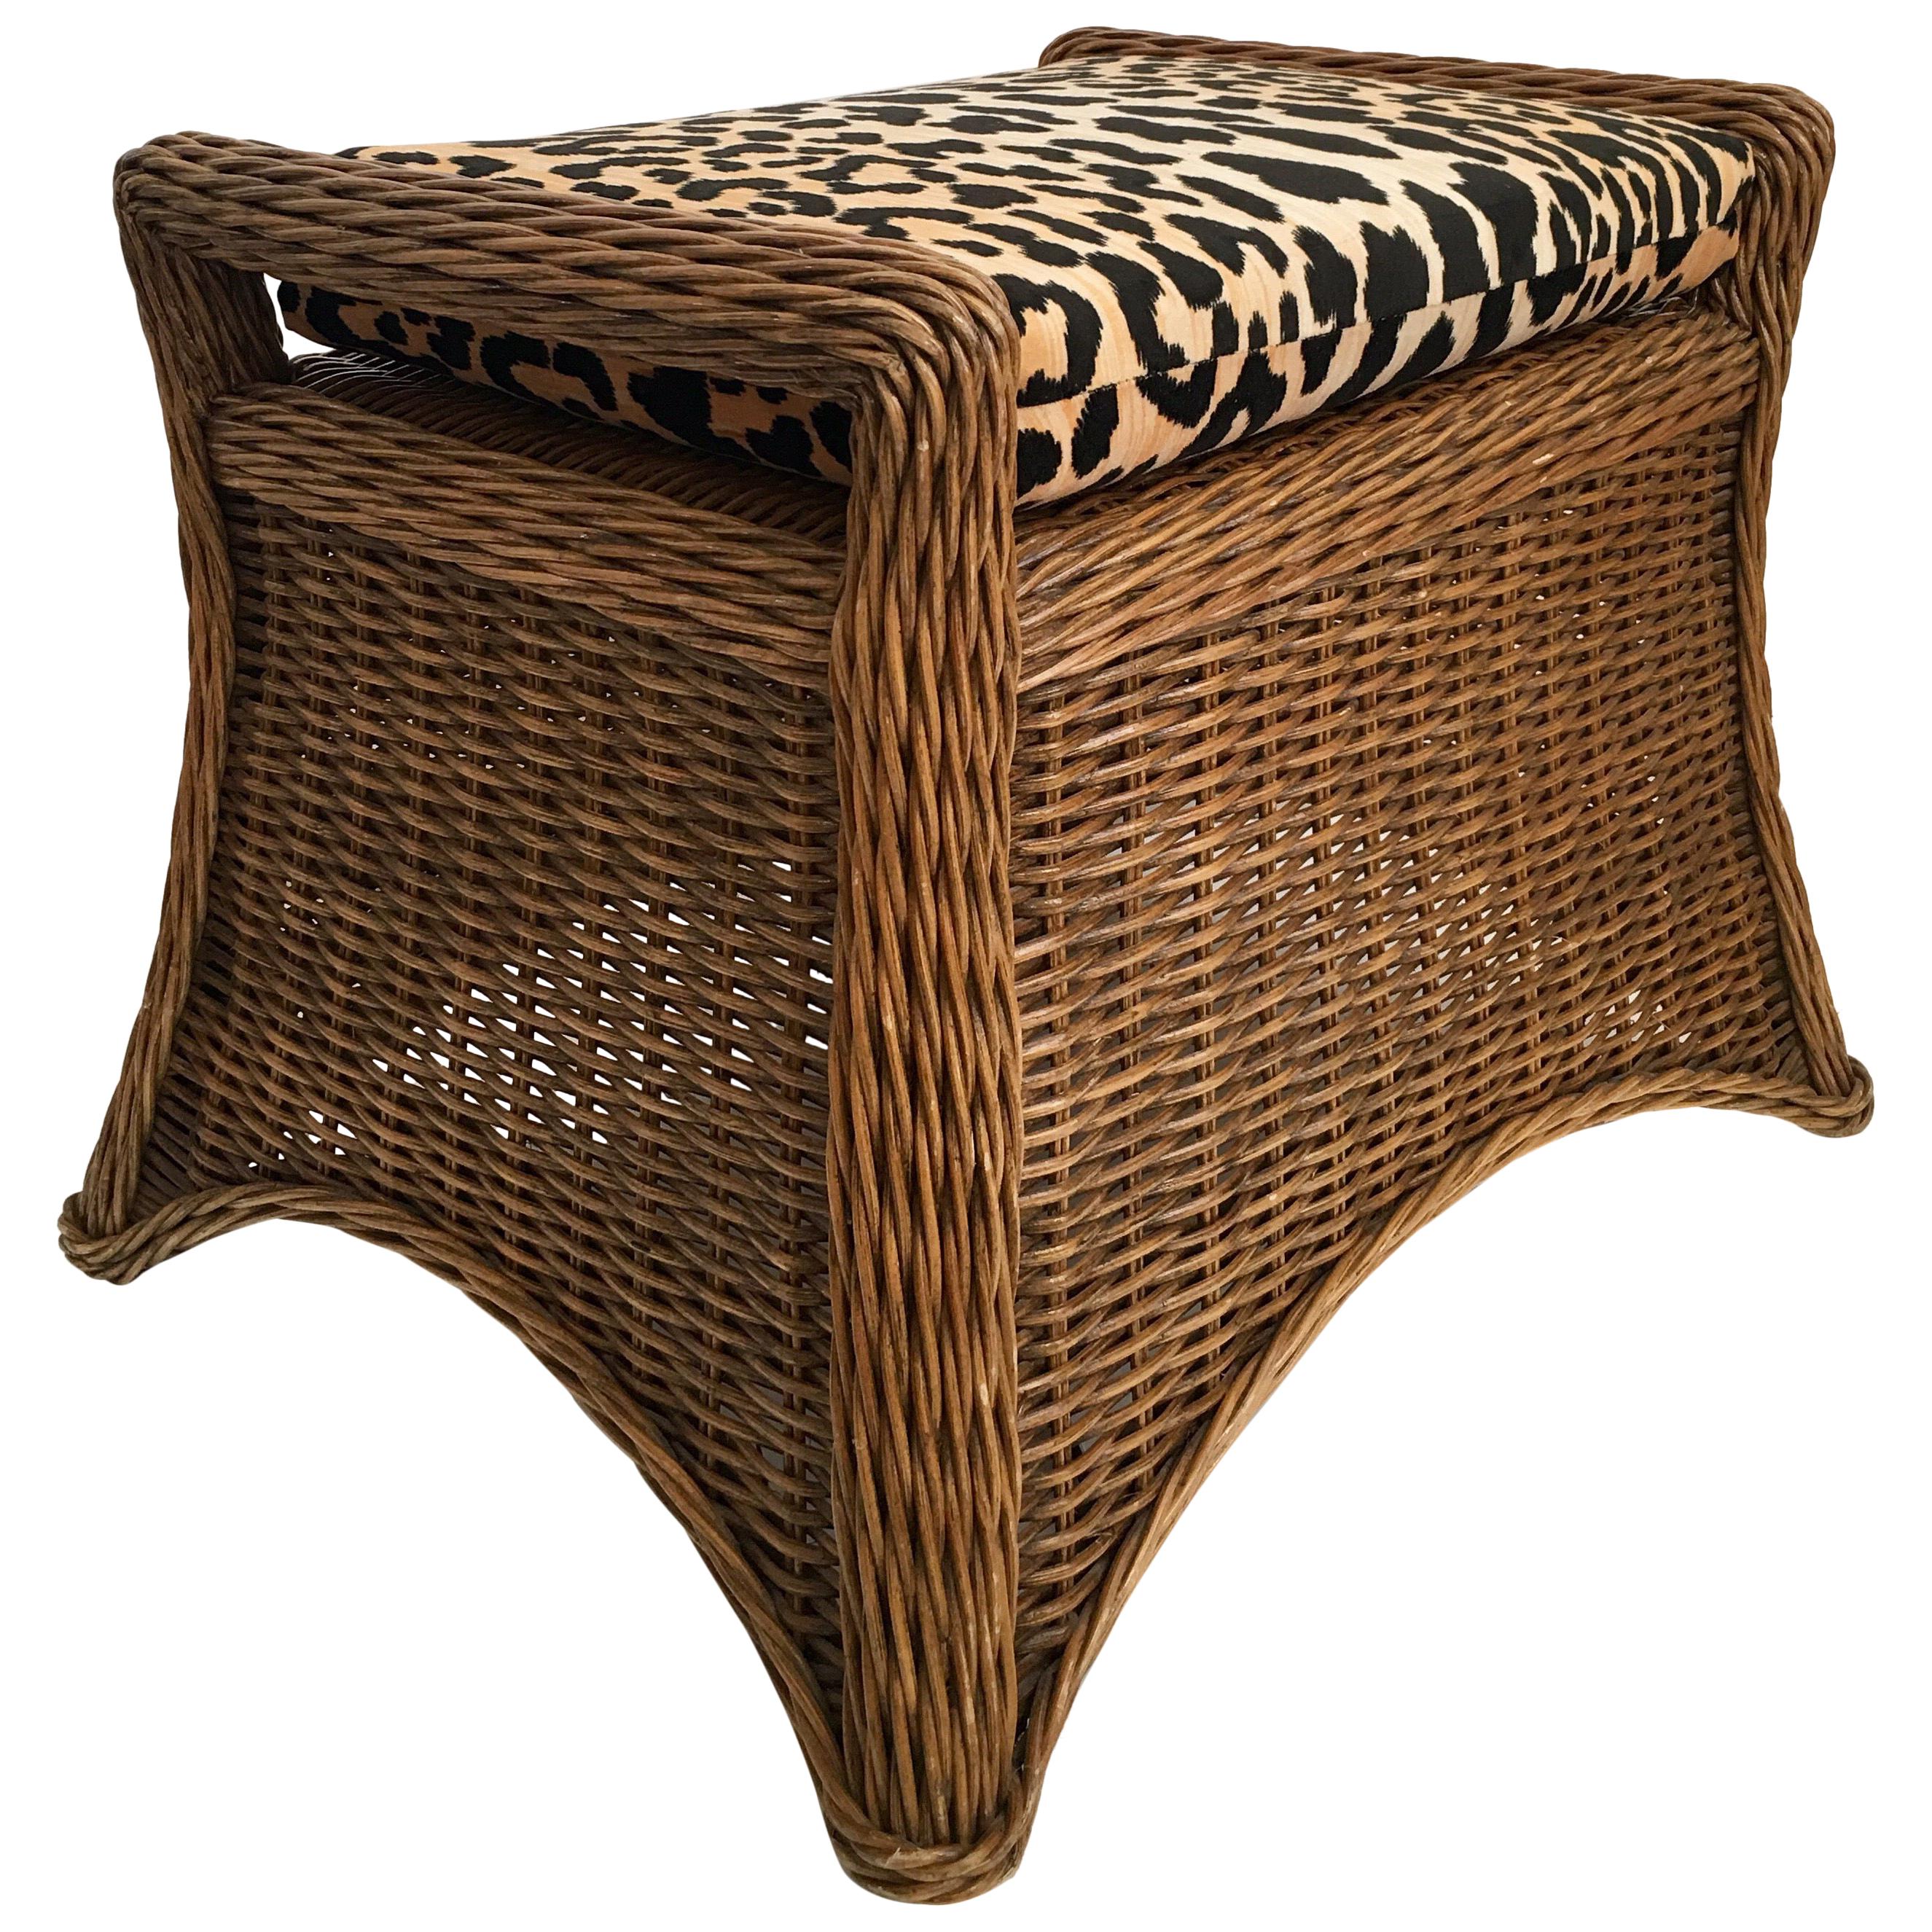 Sculptural Draped Wicker Bench with Animal Print Cushion